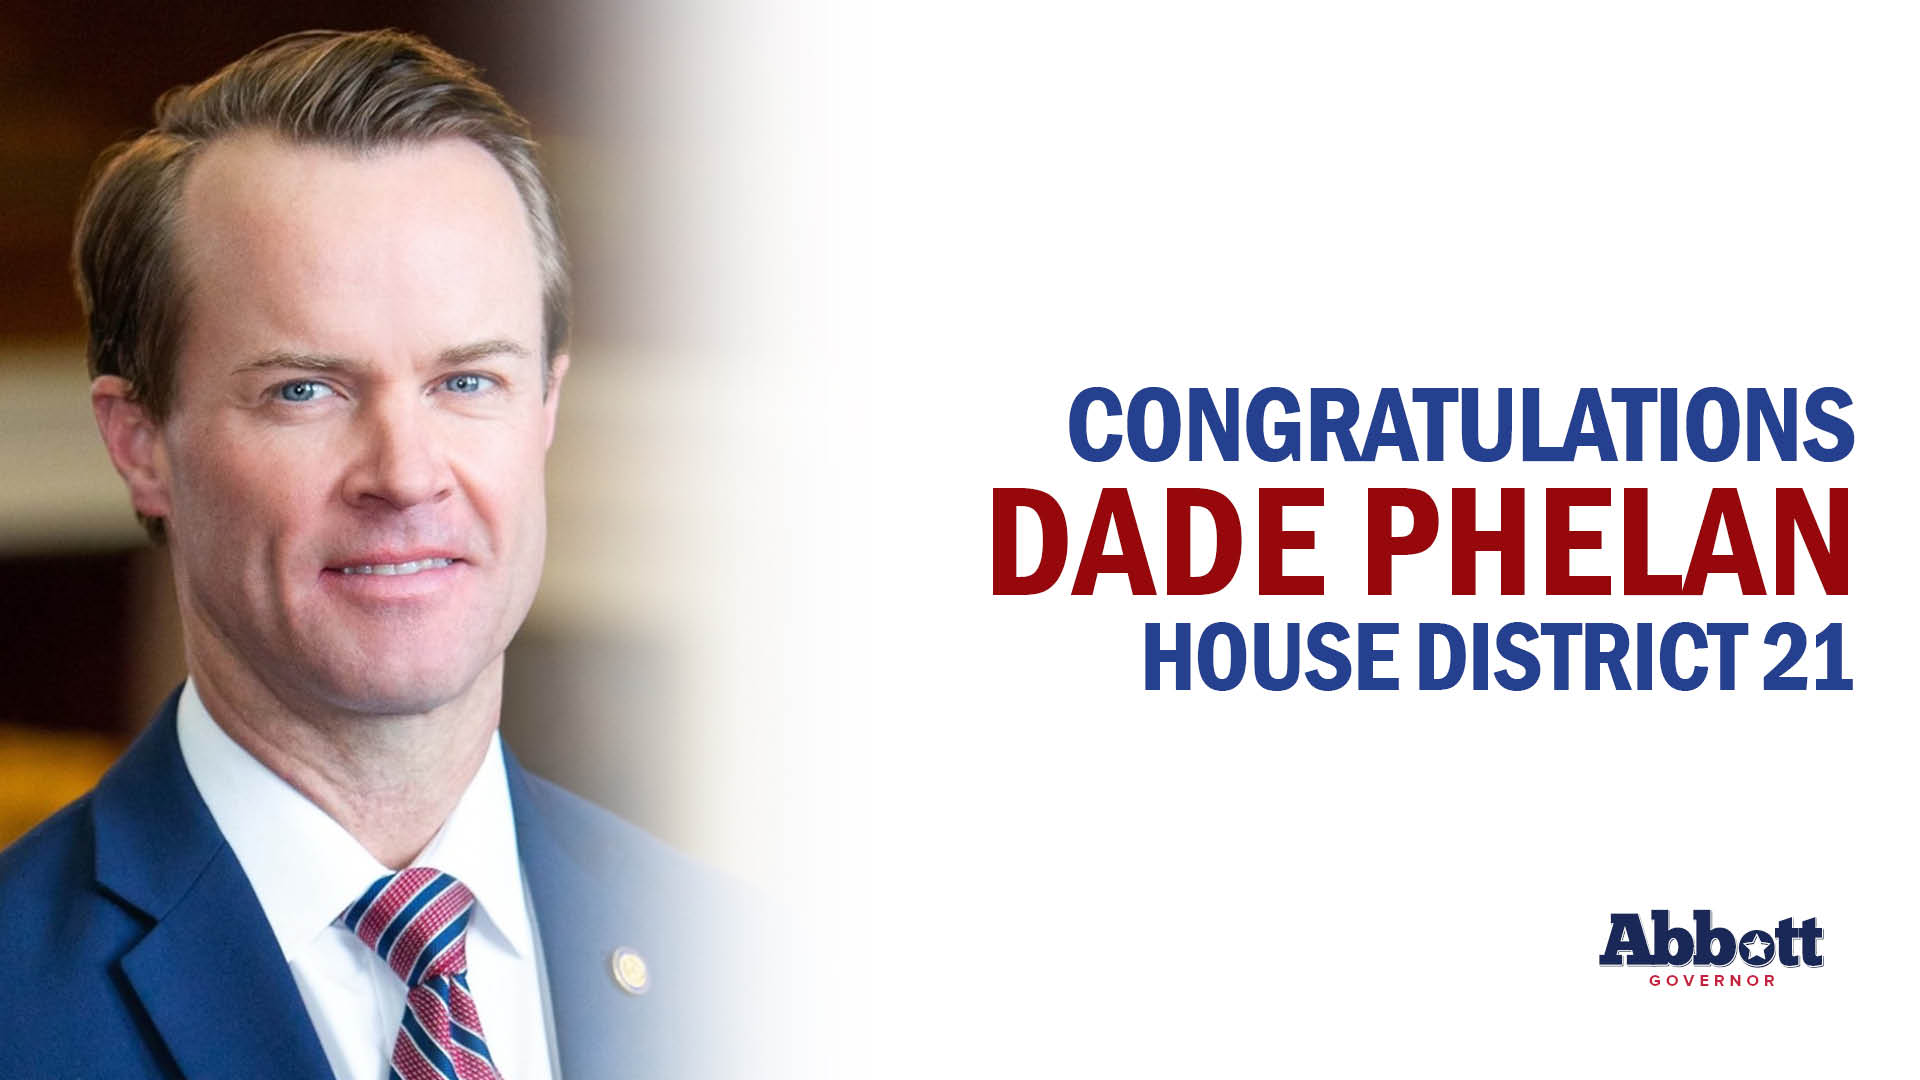 Governor Abbott Applauds Representative Dade Phelan On Re-Election Victory